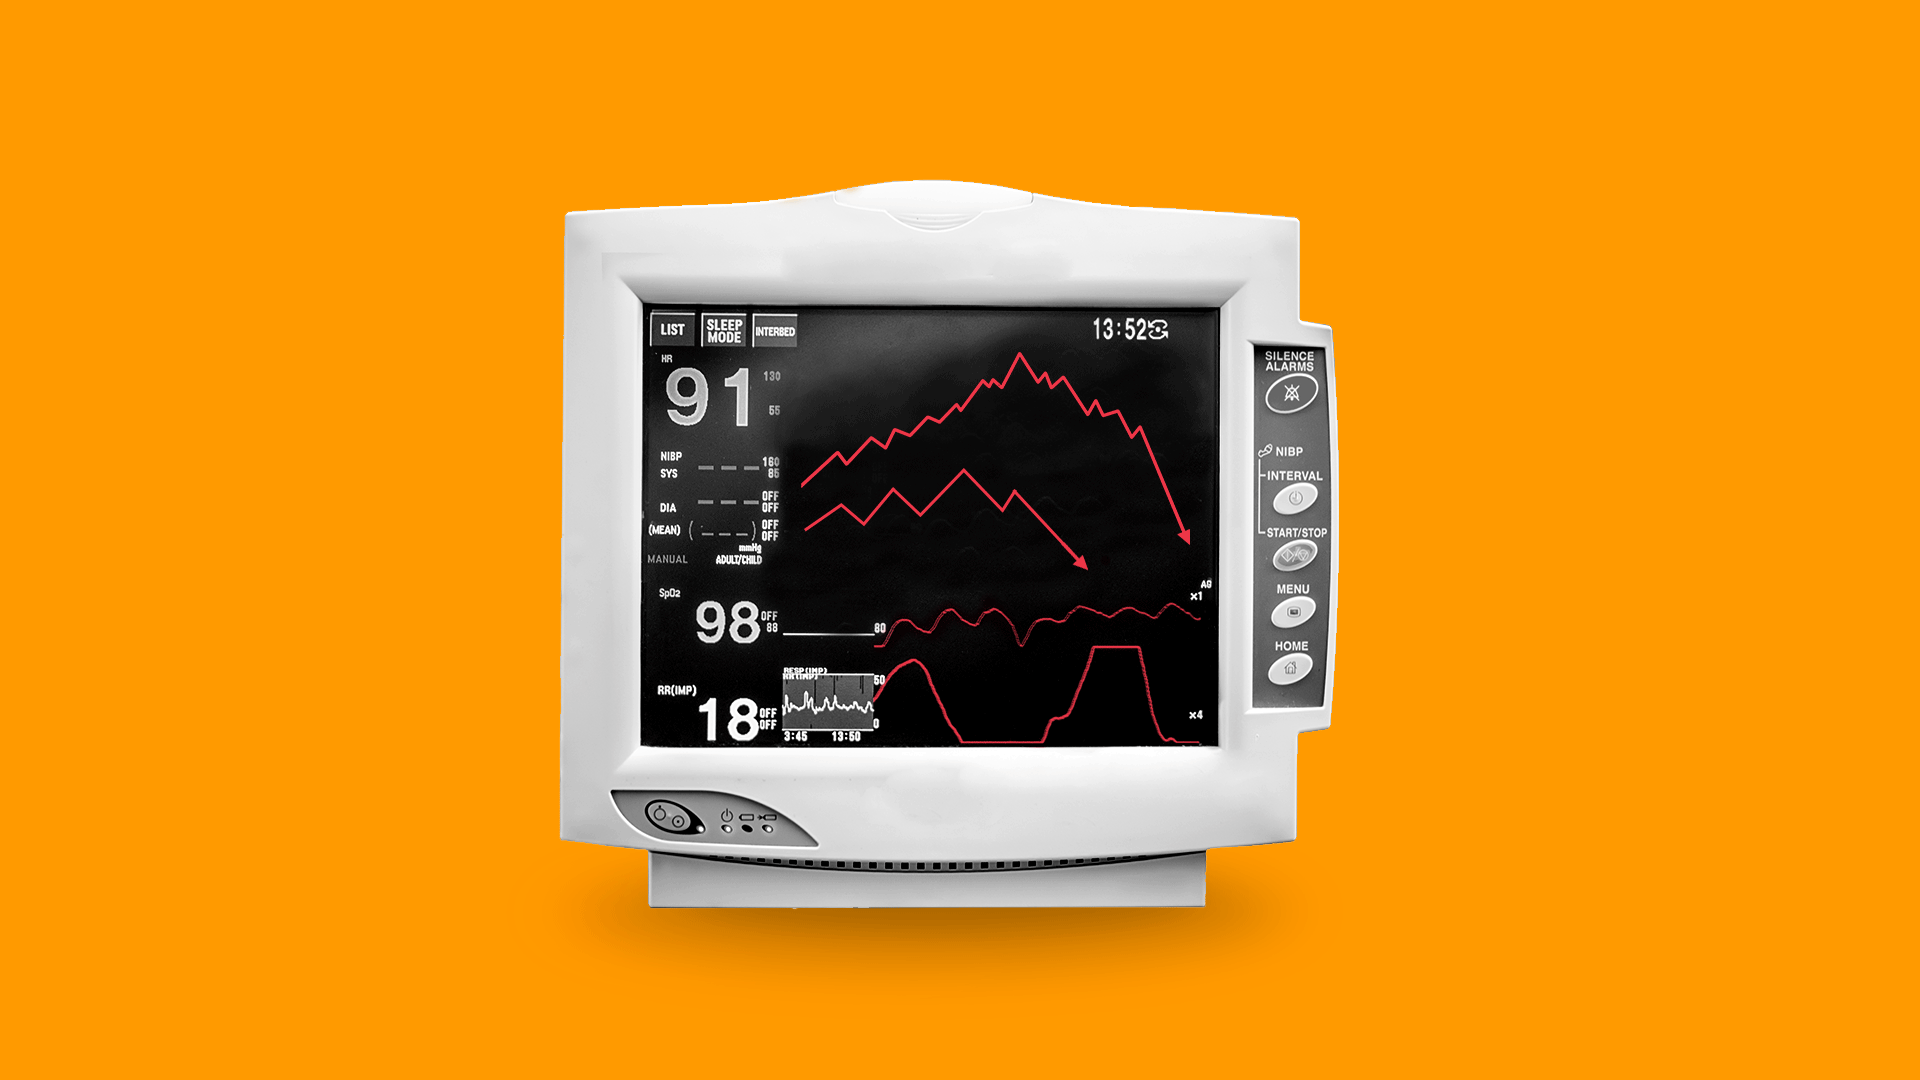 Illustration of an EKG machine with downward pointing market trend lines in place of heartbeat information.